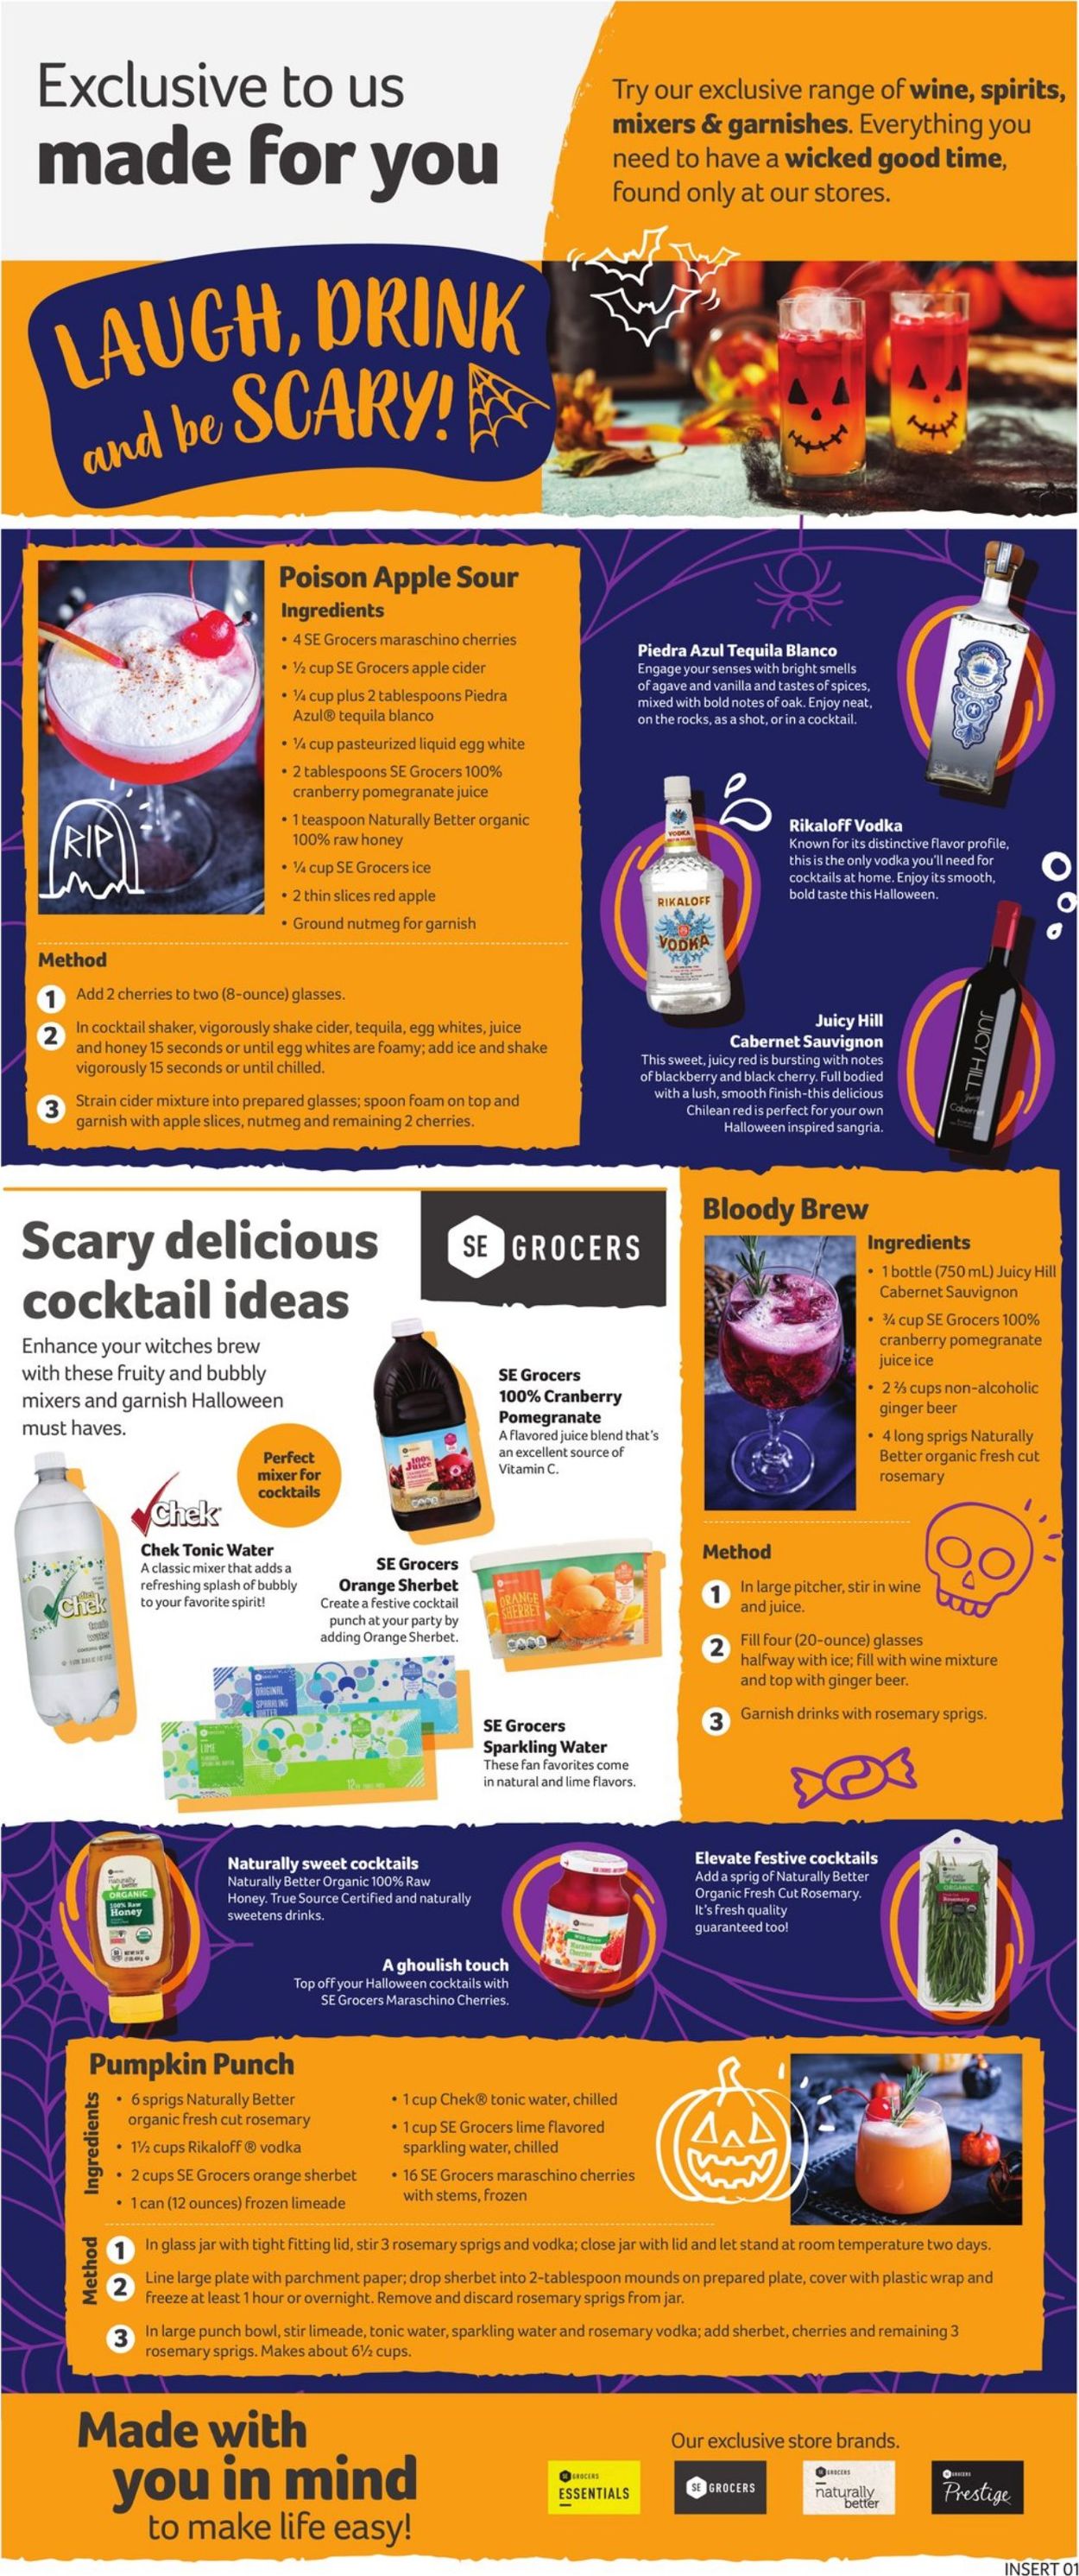 BI-LO Ad from 10/14/2020